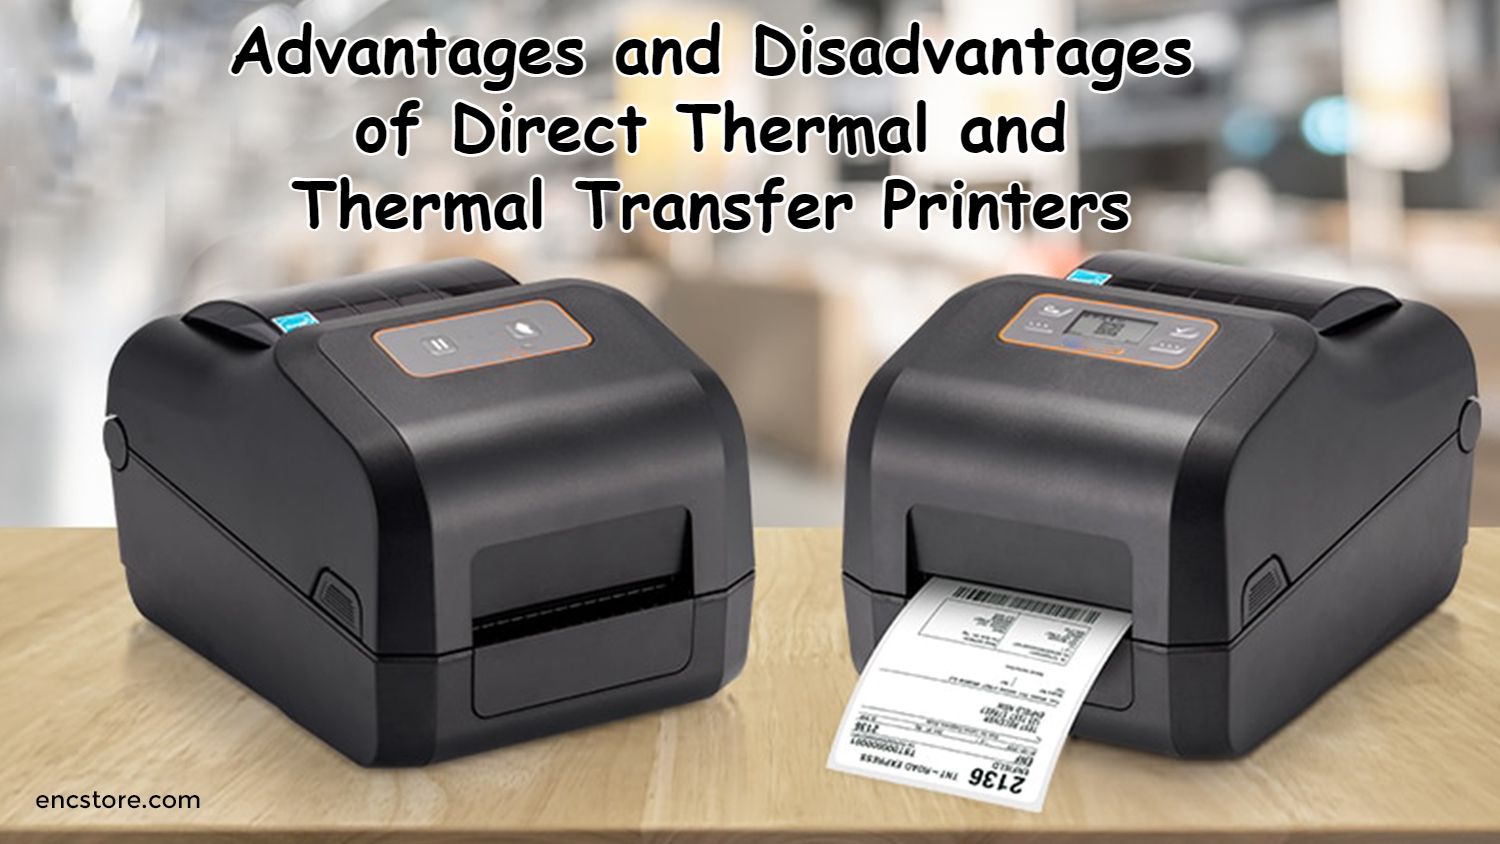 Advantages and Disadvantages of Direct Thermal and Thermal Transfer Printers